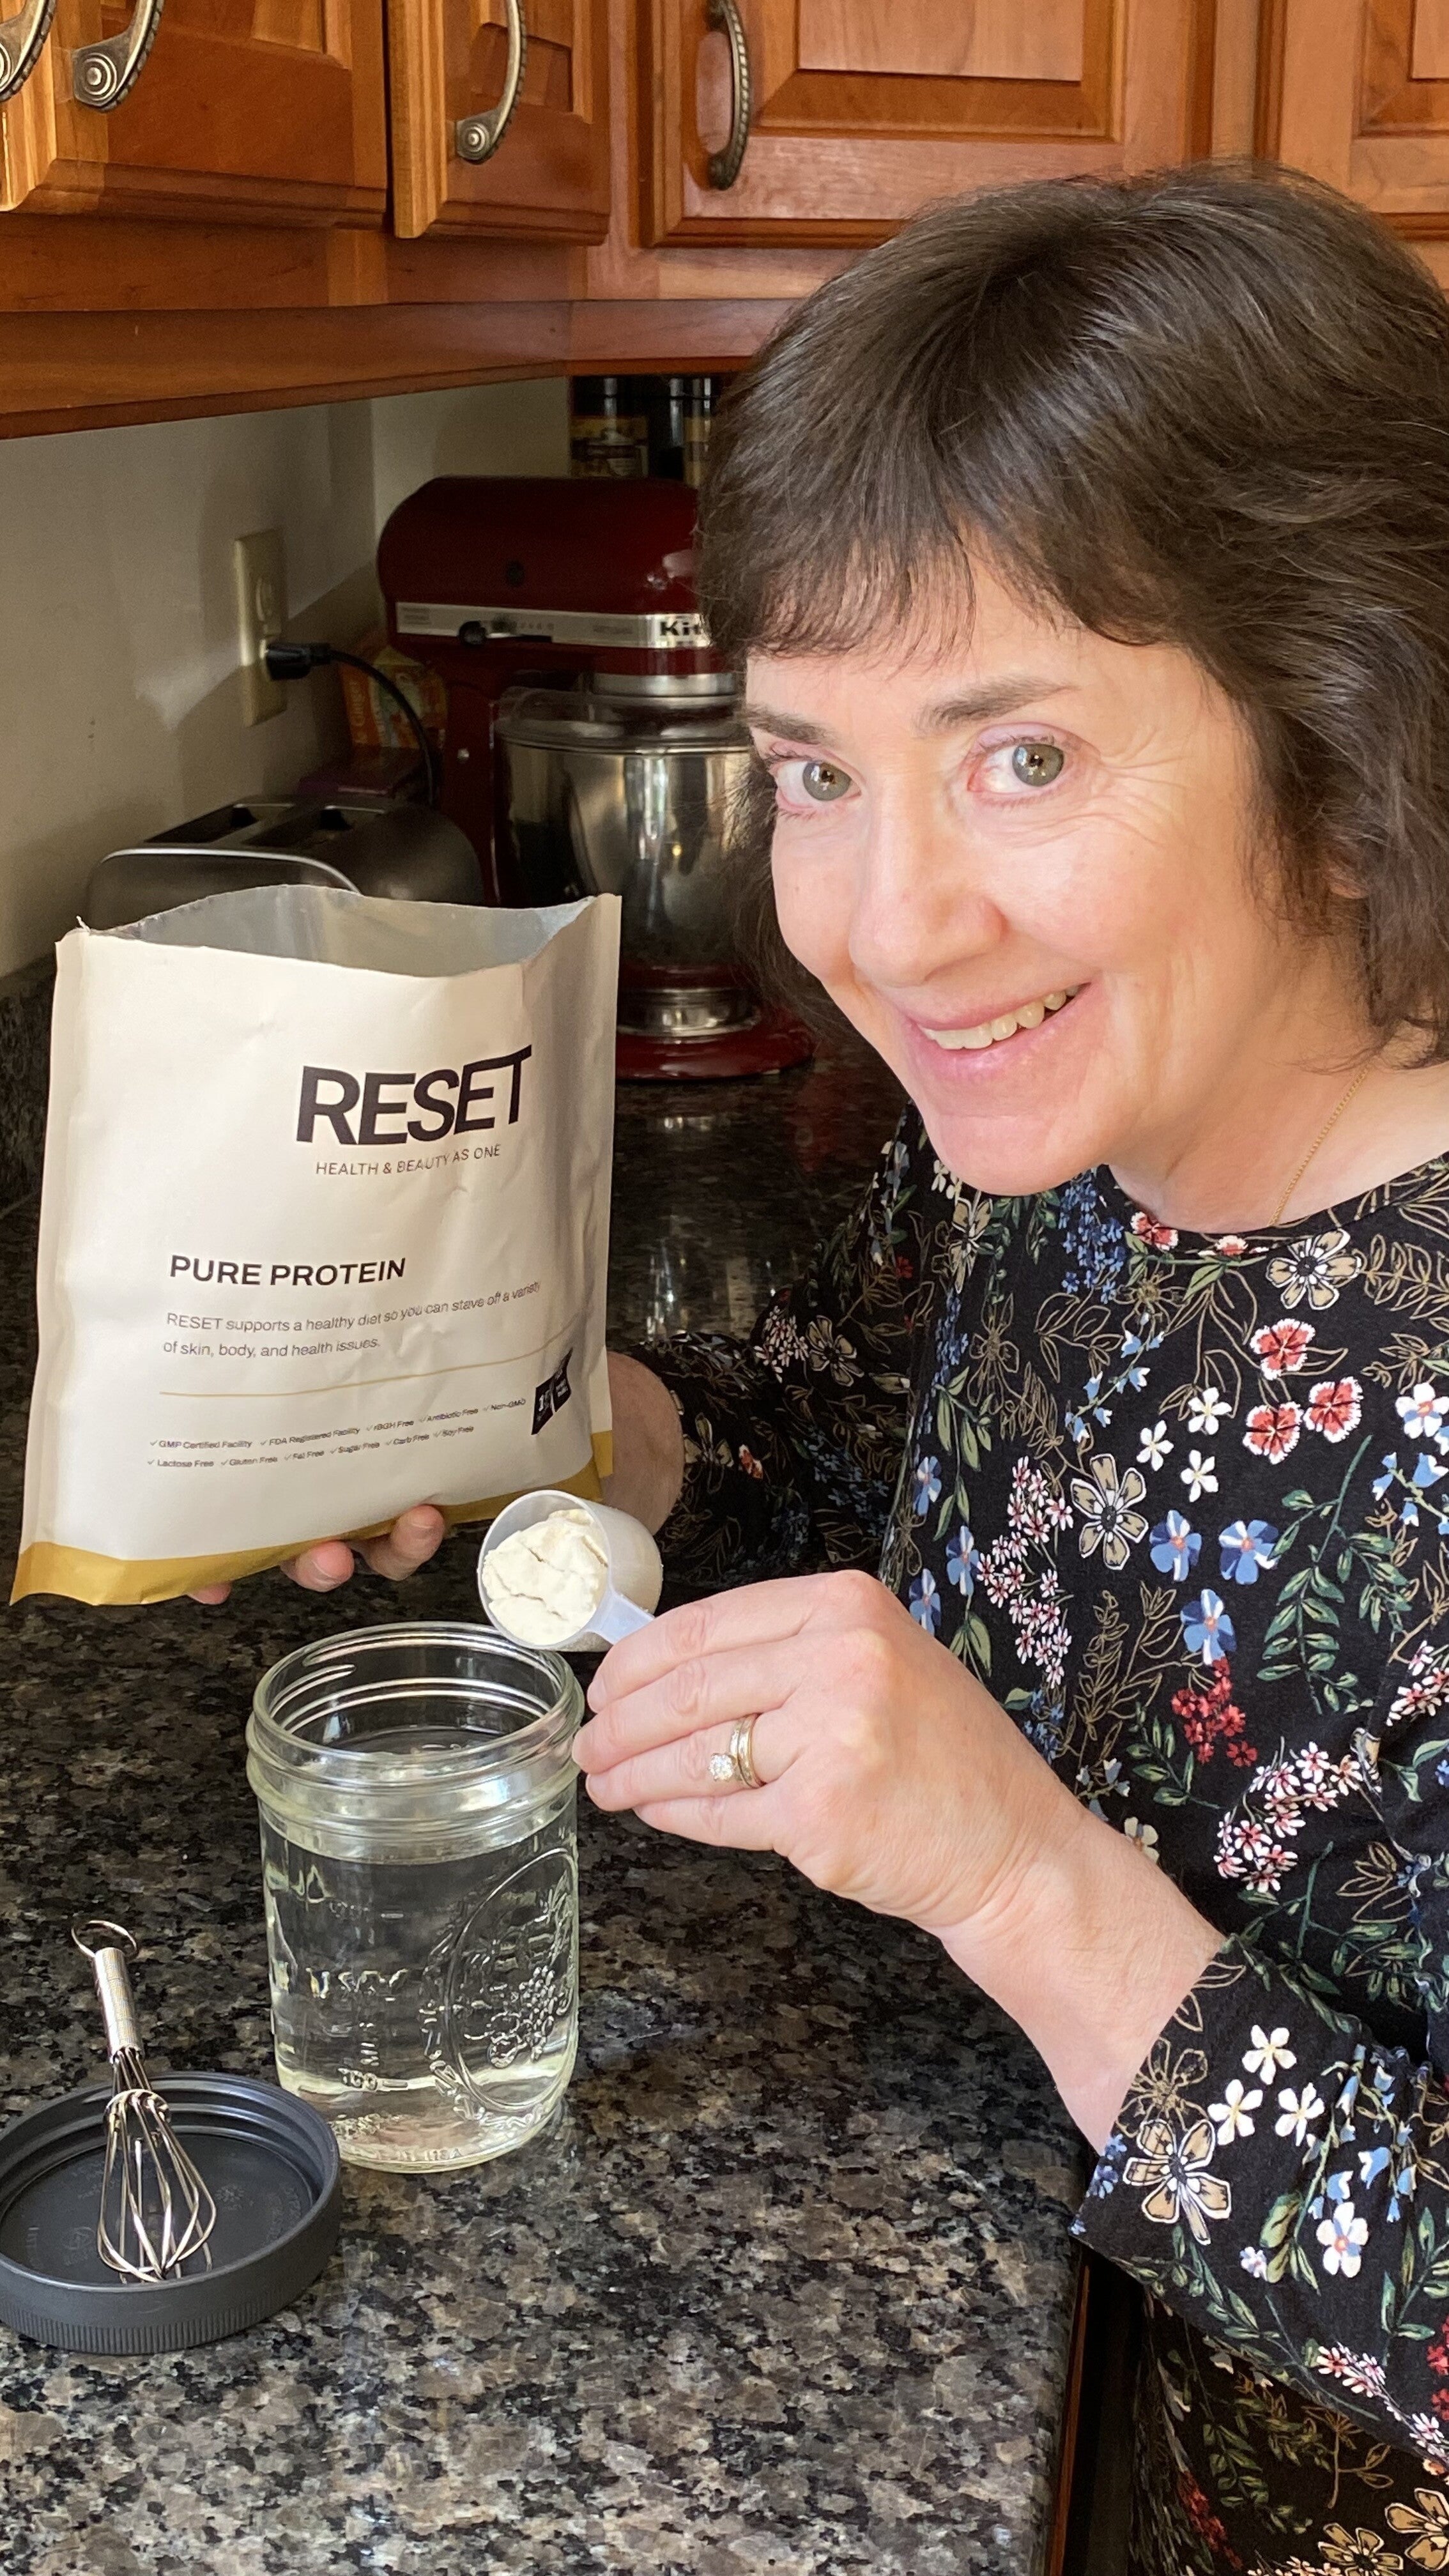 Using Reset Health Pure Protein